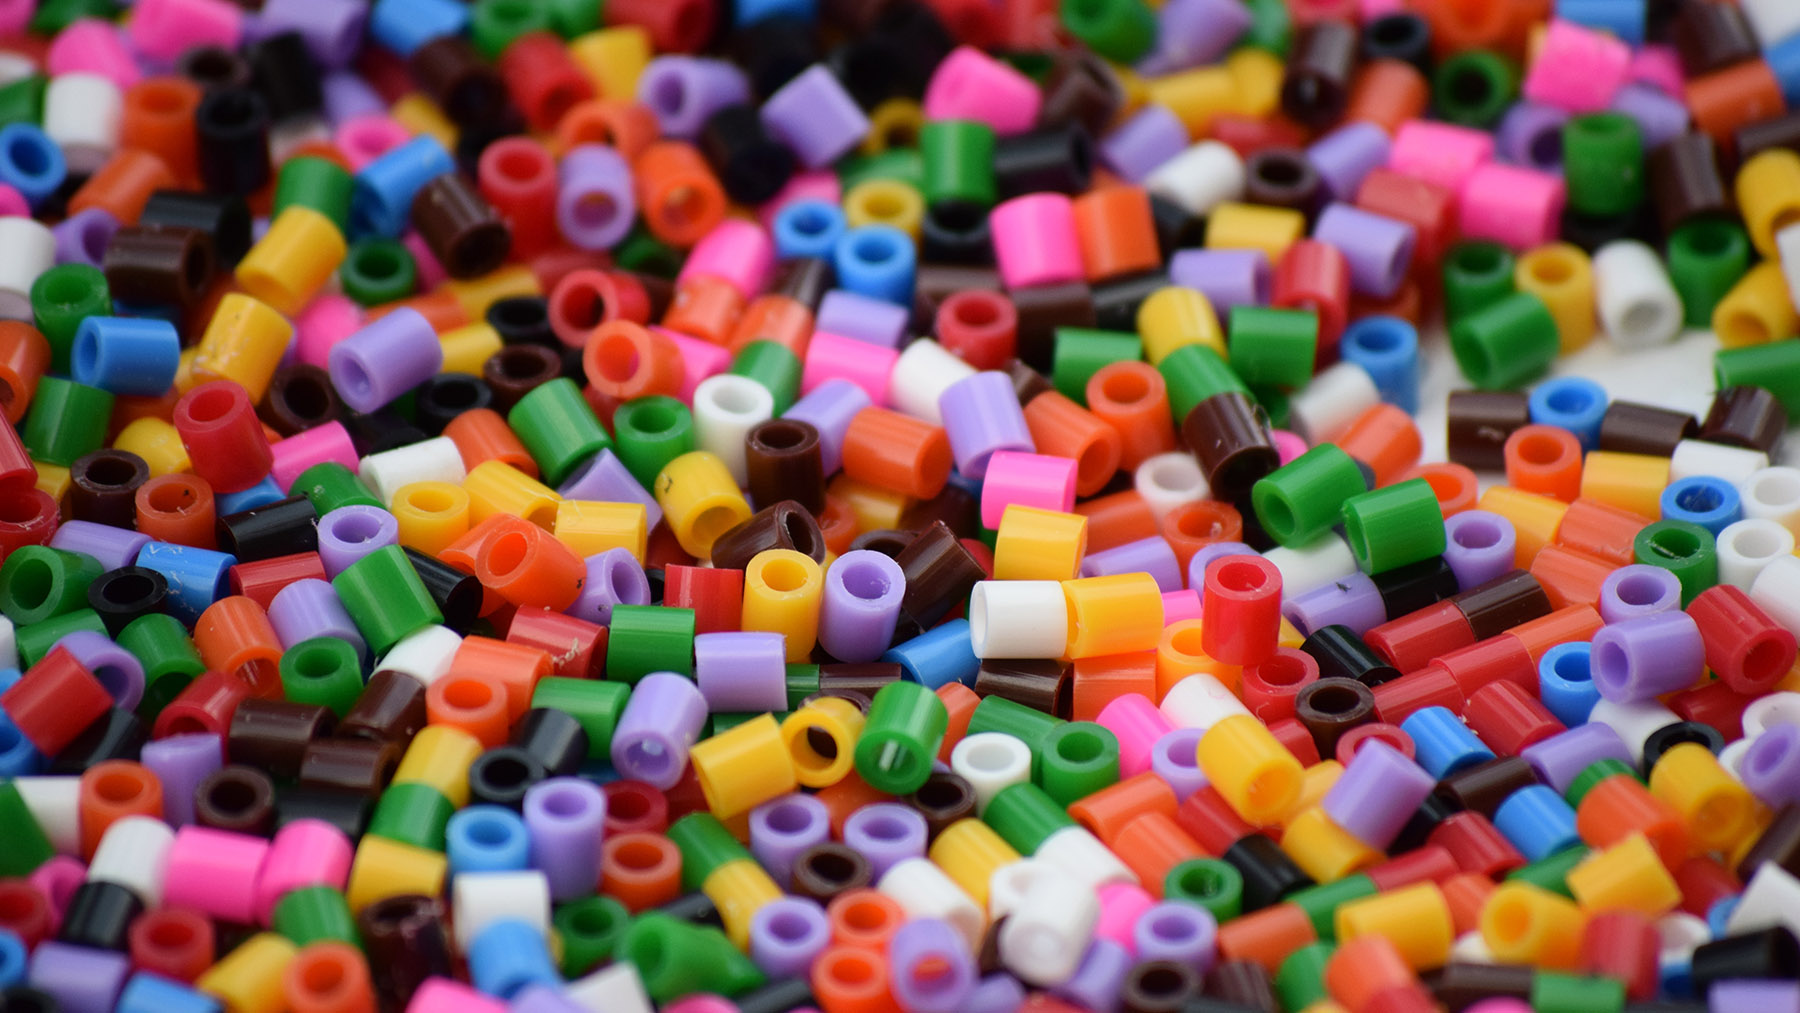 Photo of colorful plastic beads (Creative Commons image, courtesy of RawPixel.com)